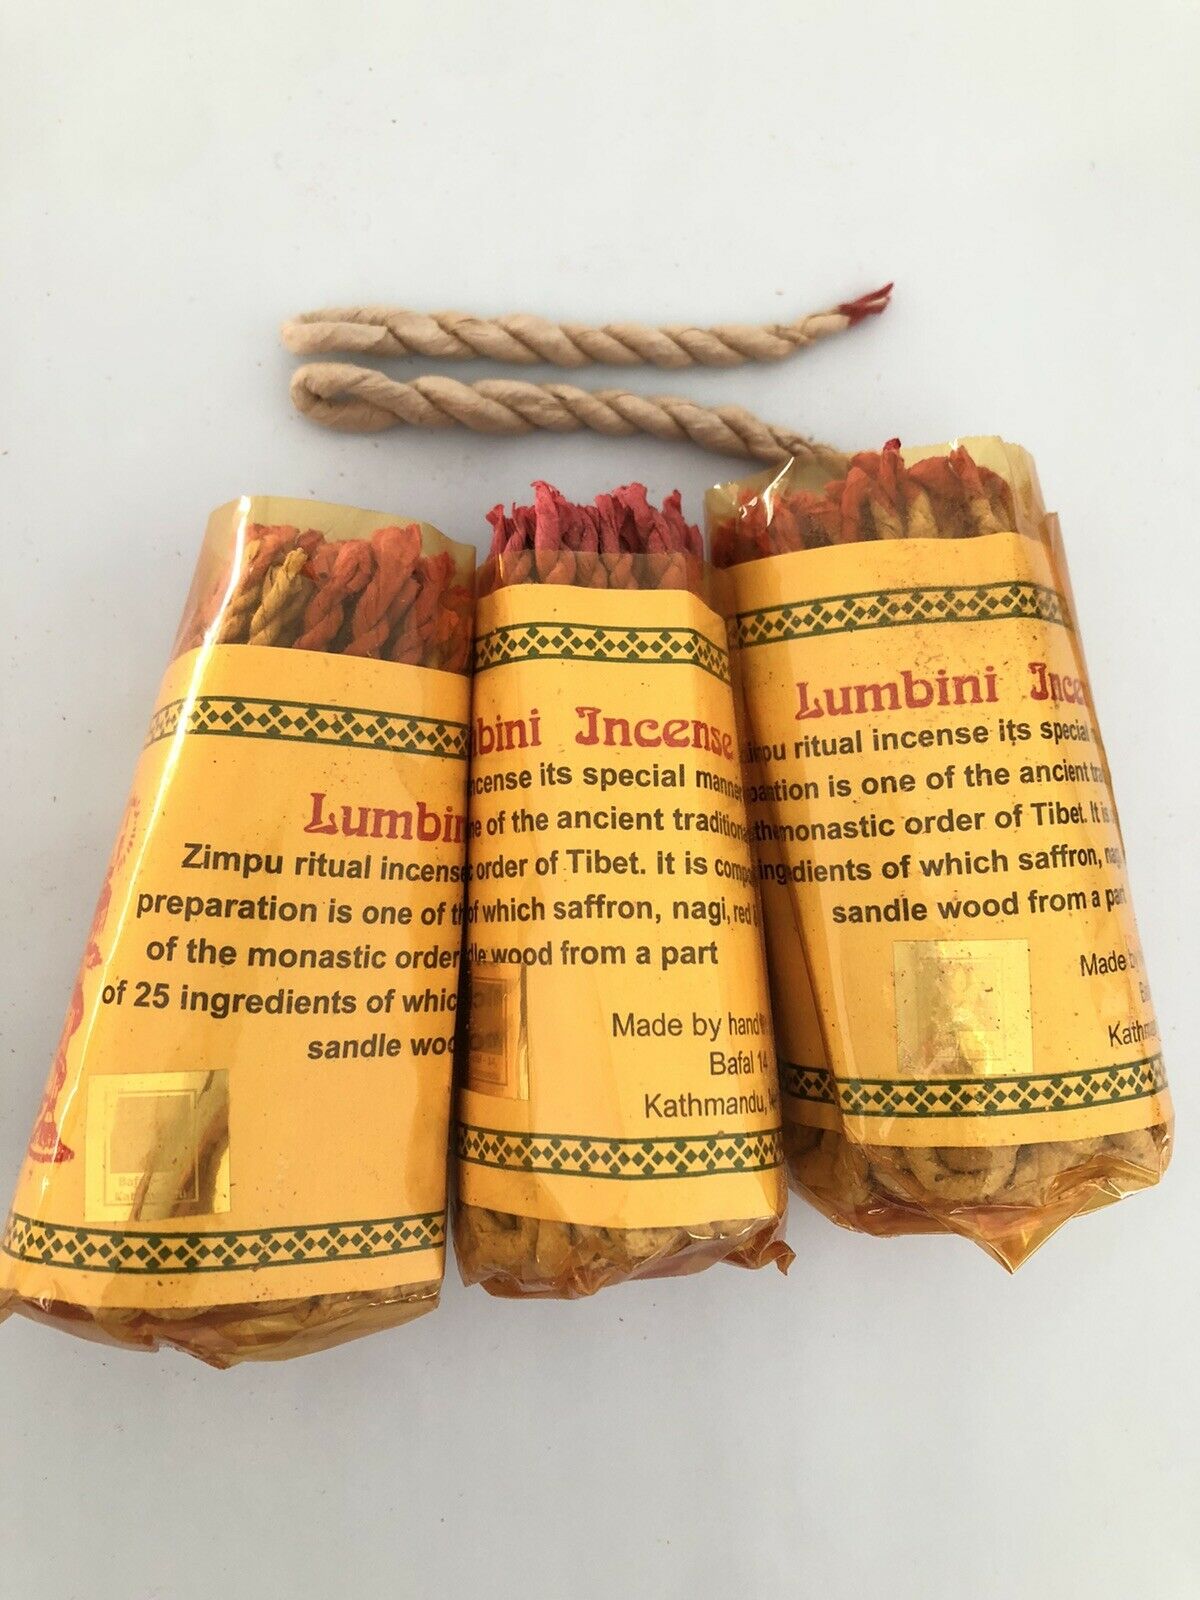 Meditation Aromatherapy Home Made Organic Rose Tibetan Rope Incense Handmade in Nepal 45 in Ropes Used for Aesthetic Reasons and Ceremony. and in Therapy Each Bundle Contains Approx